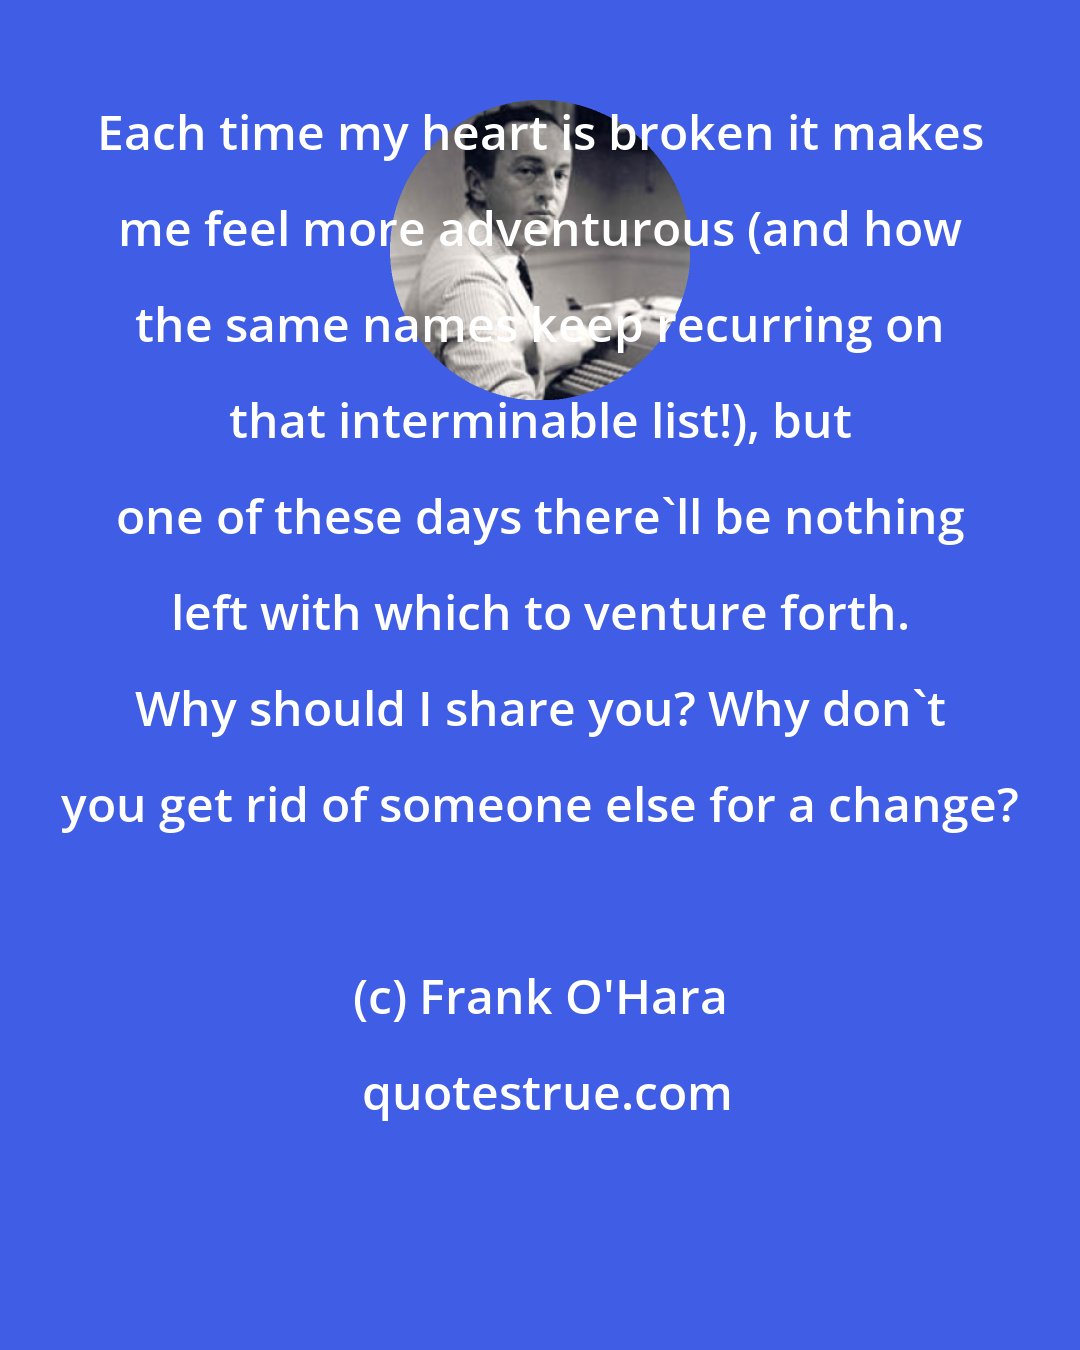 Frank O'Hara: Each time my heart is broken it makes me feel more adventurous (and how the same names keep recurring on that interminable list!), but one of these days there'll be nothing left with which to venture forth. Why should I share you? Why don't you get rid of someone else for a change?